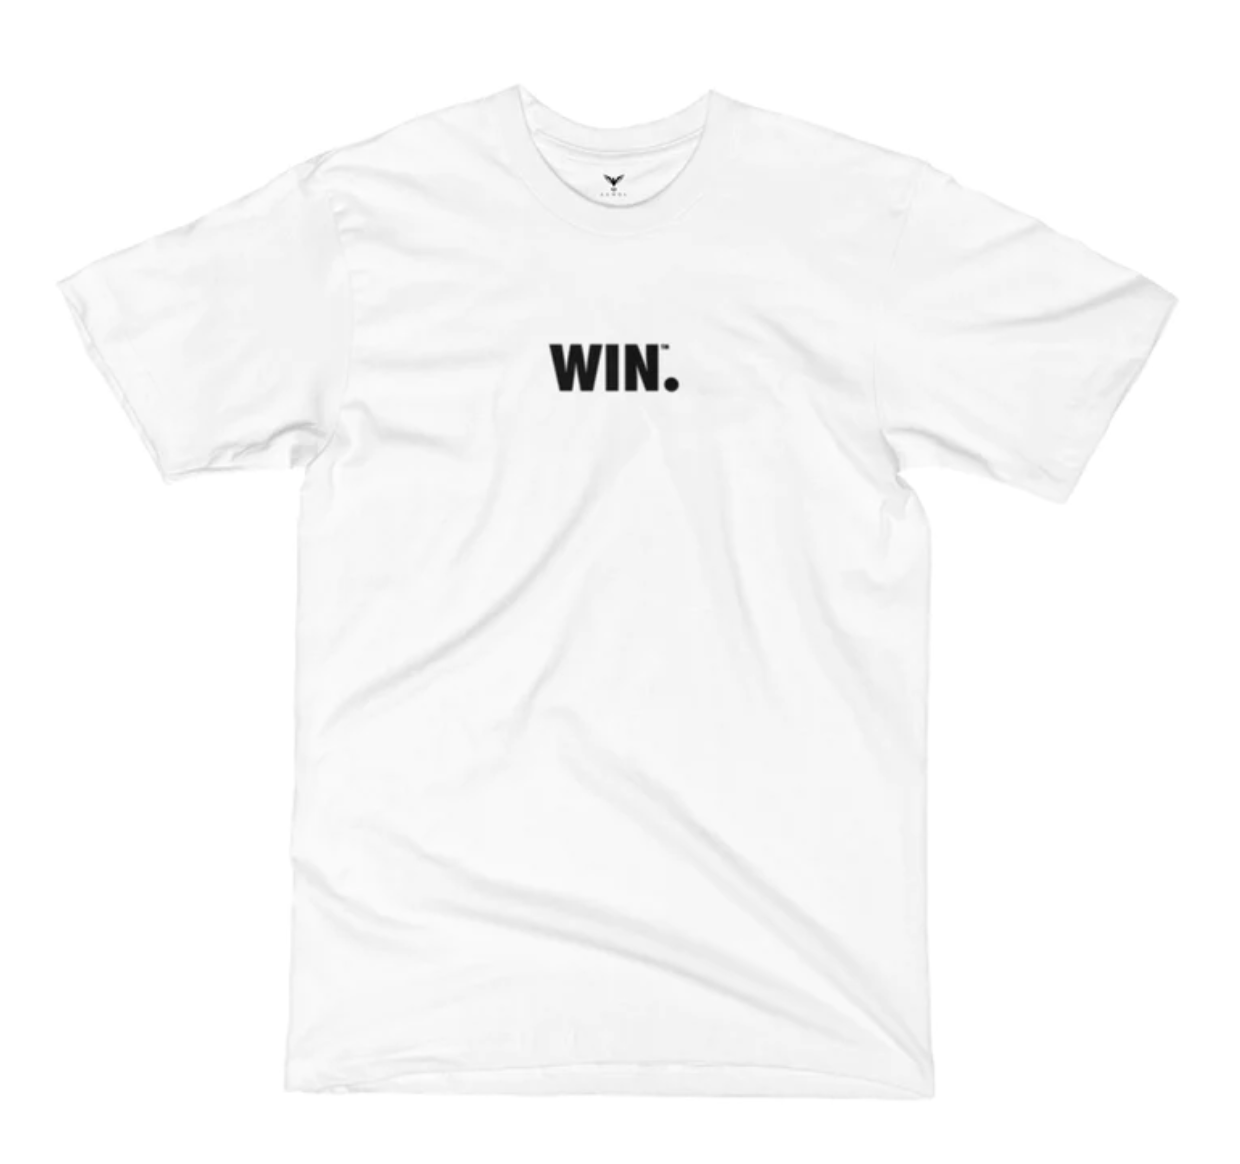 Win. Classic TeeProudly Designed In Atlanta, GA - The Win. Classic Tee features the classic Win. Logo on 100% Cotton fabric to help keep you comfortable. Fits true to size. 
Win. IsWin. BrandClassic Tee